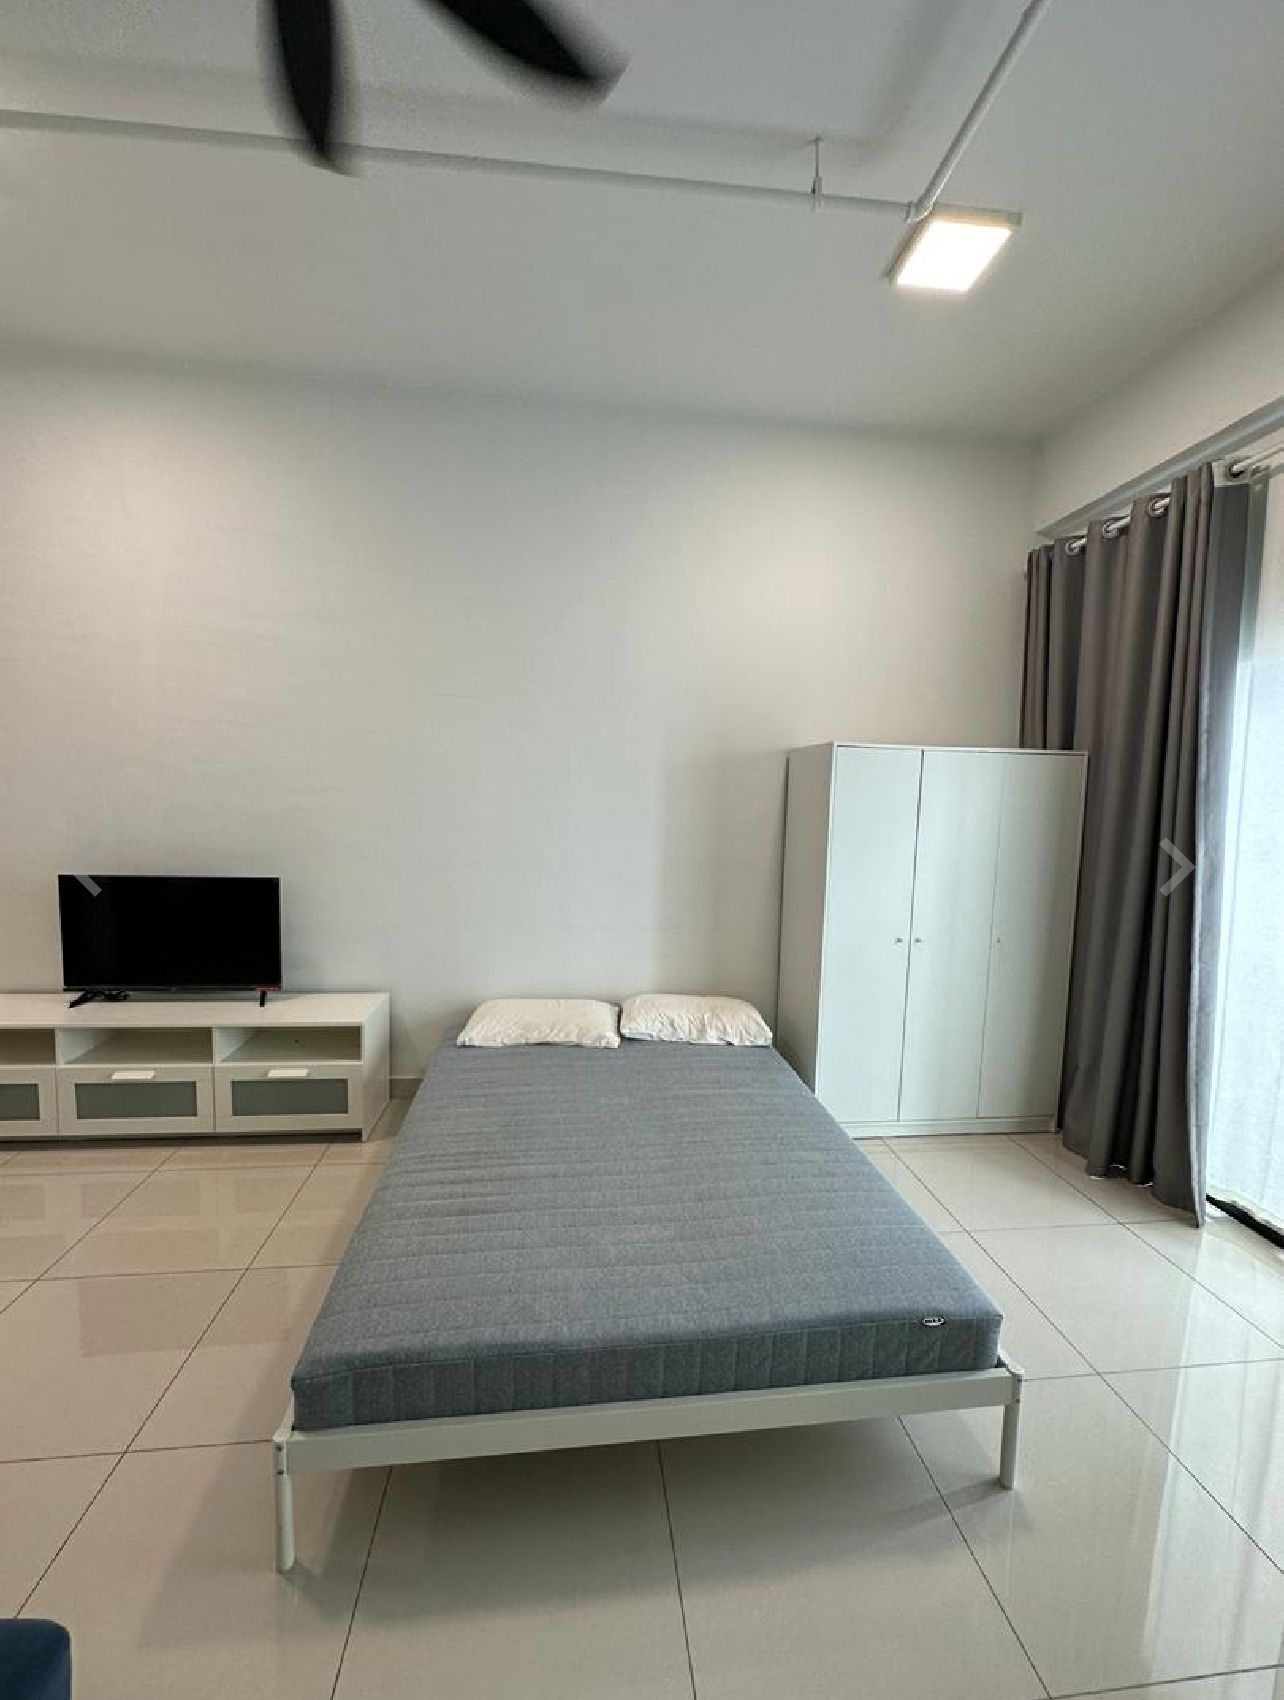 room for rent, studio, jalan mutiara emas 10/2, Send the owner a message on WhatsApp/facebook if you want to RENT the unit facebook (Mohammed Nhat)&Telegram(@muhammednhat101) Fully furnished non sharing :(comfortable)